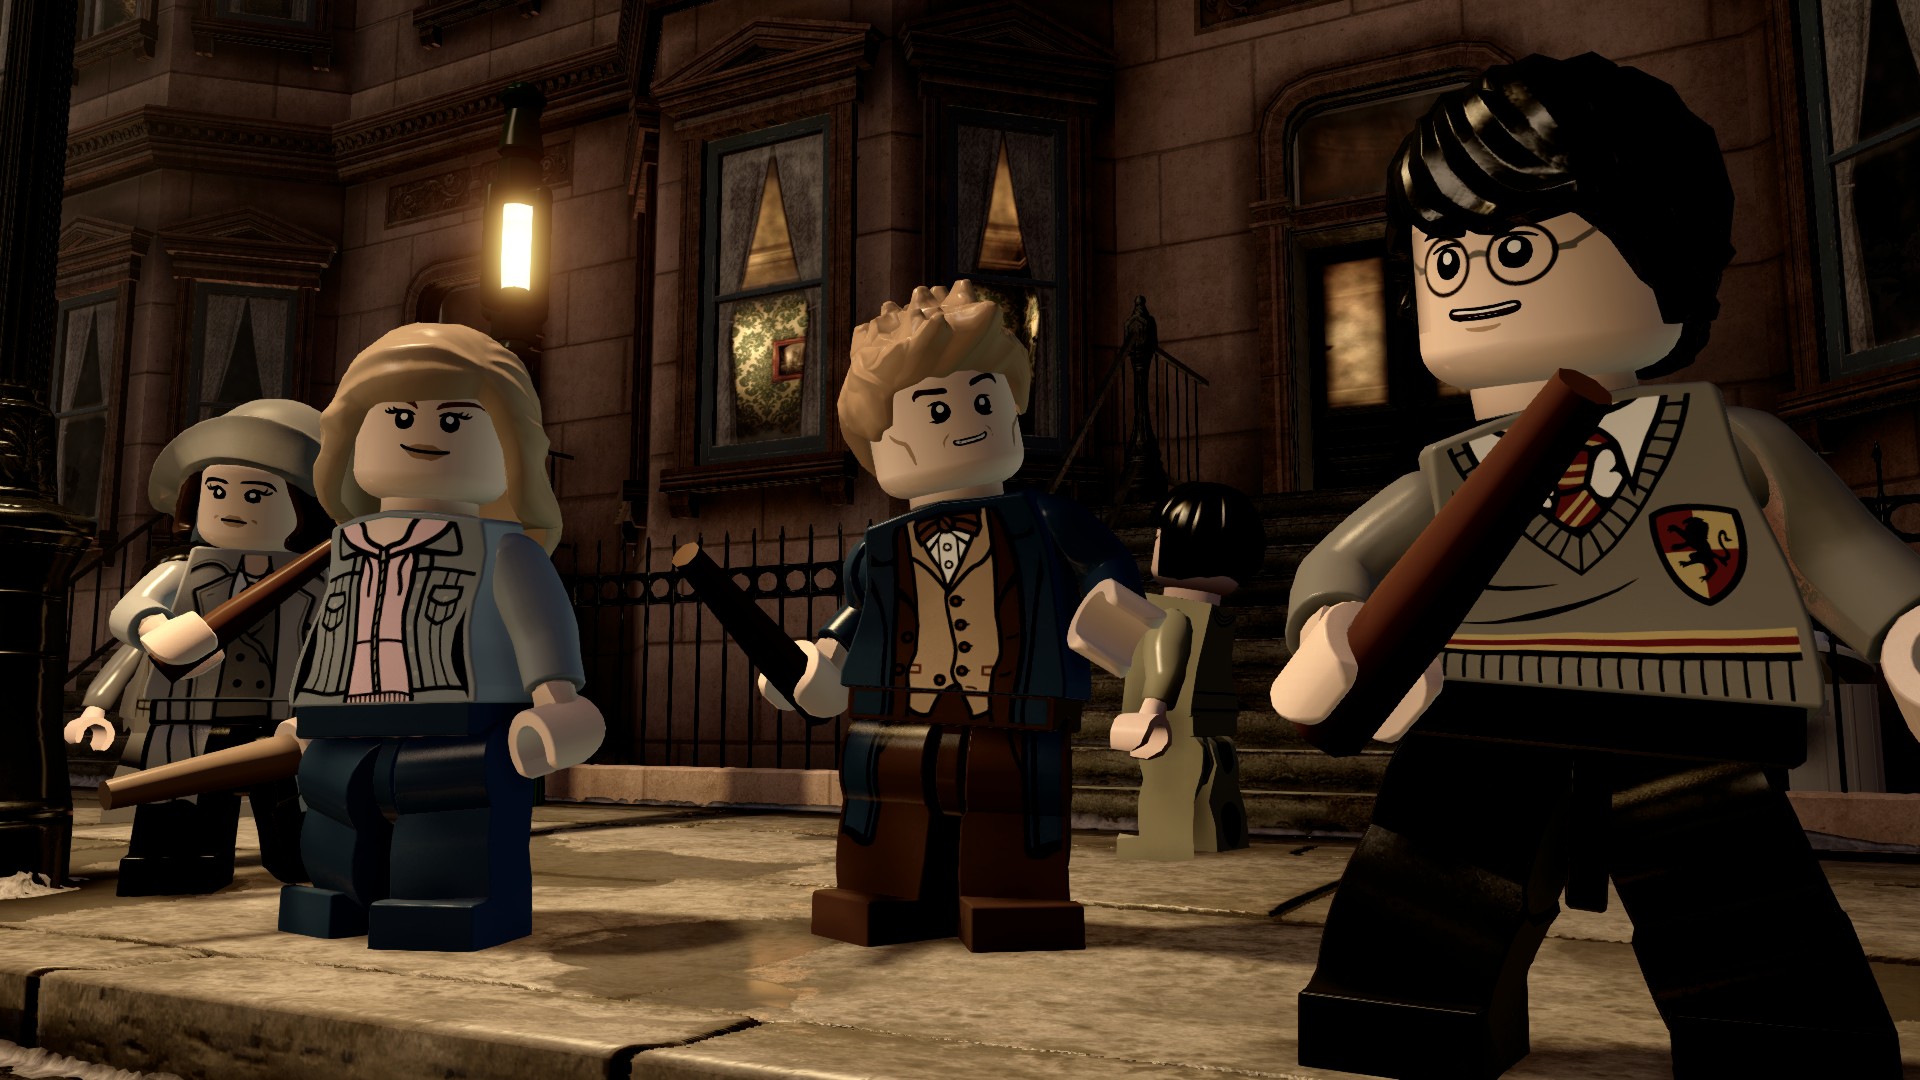 LEGO Dimensions Adds Expansion Packs Based on The Goonies, Harry Potter, and LEGO City ...1920 x 1080